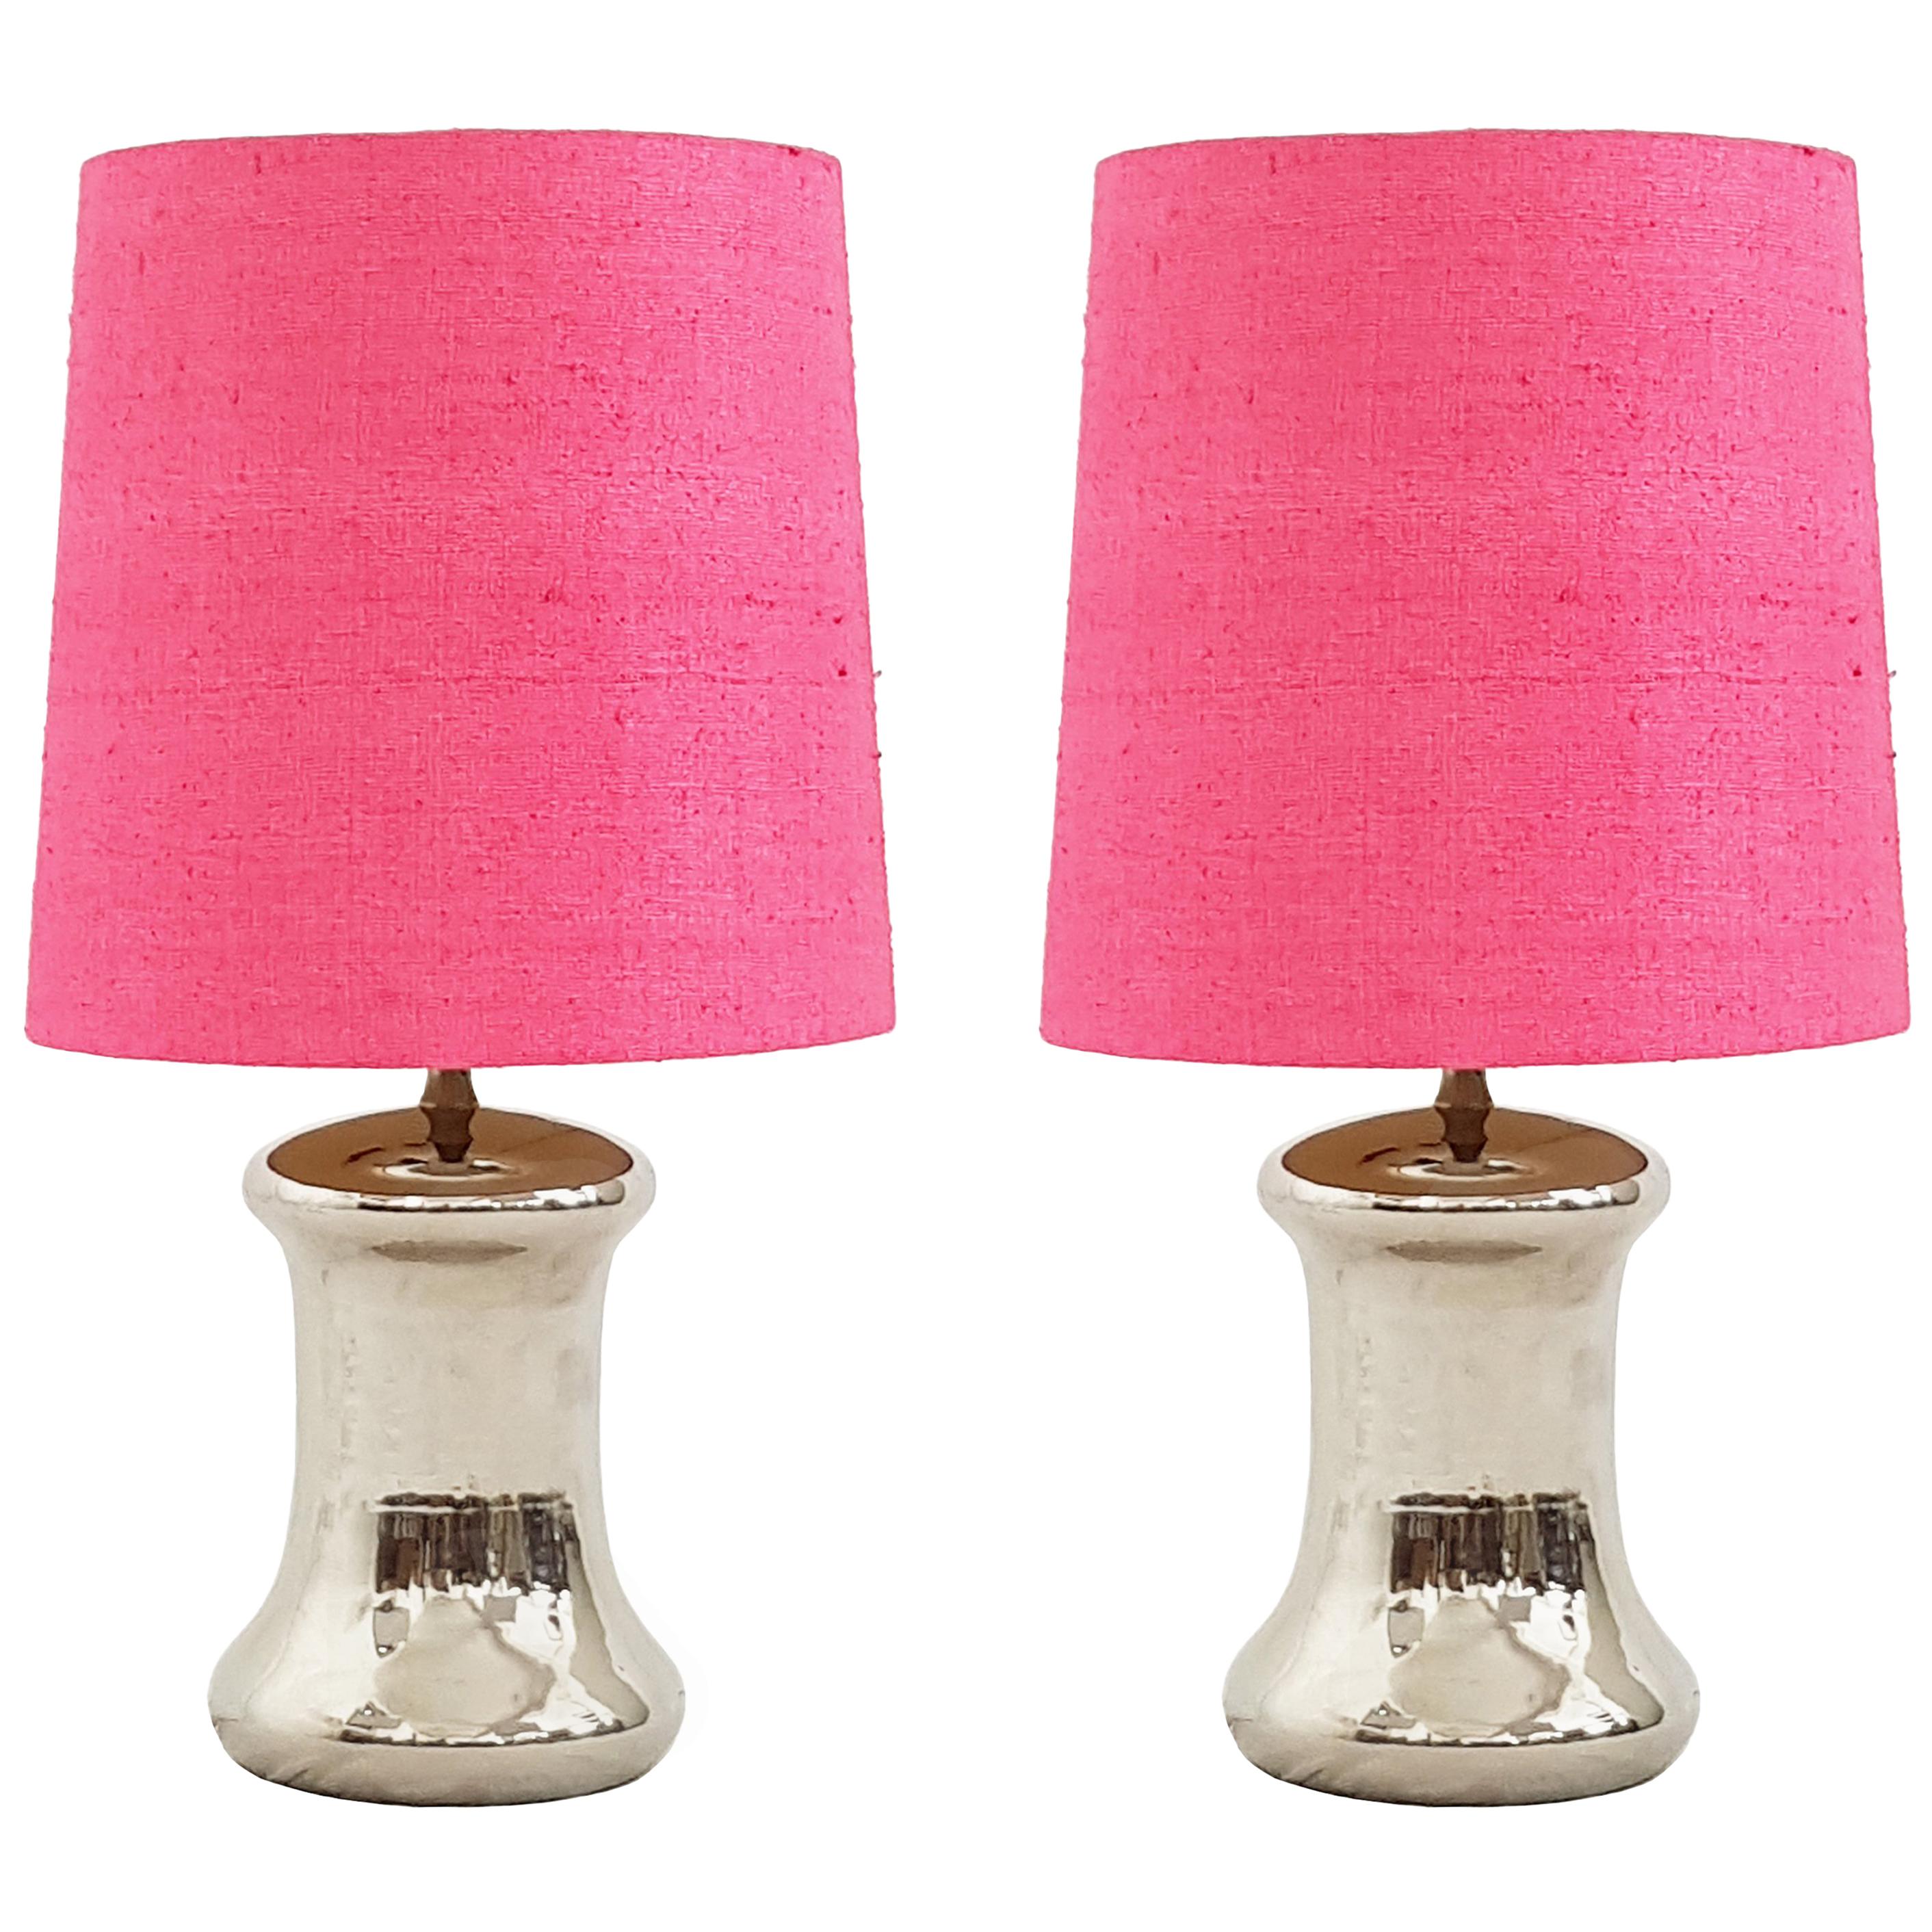 Pair of Italian Silvered Glazed Ceramic 1970s Abat Jours with Pink Fabric Shades